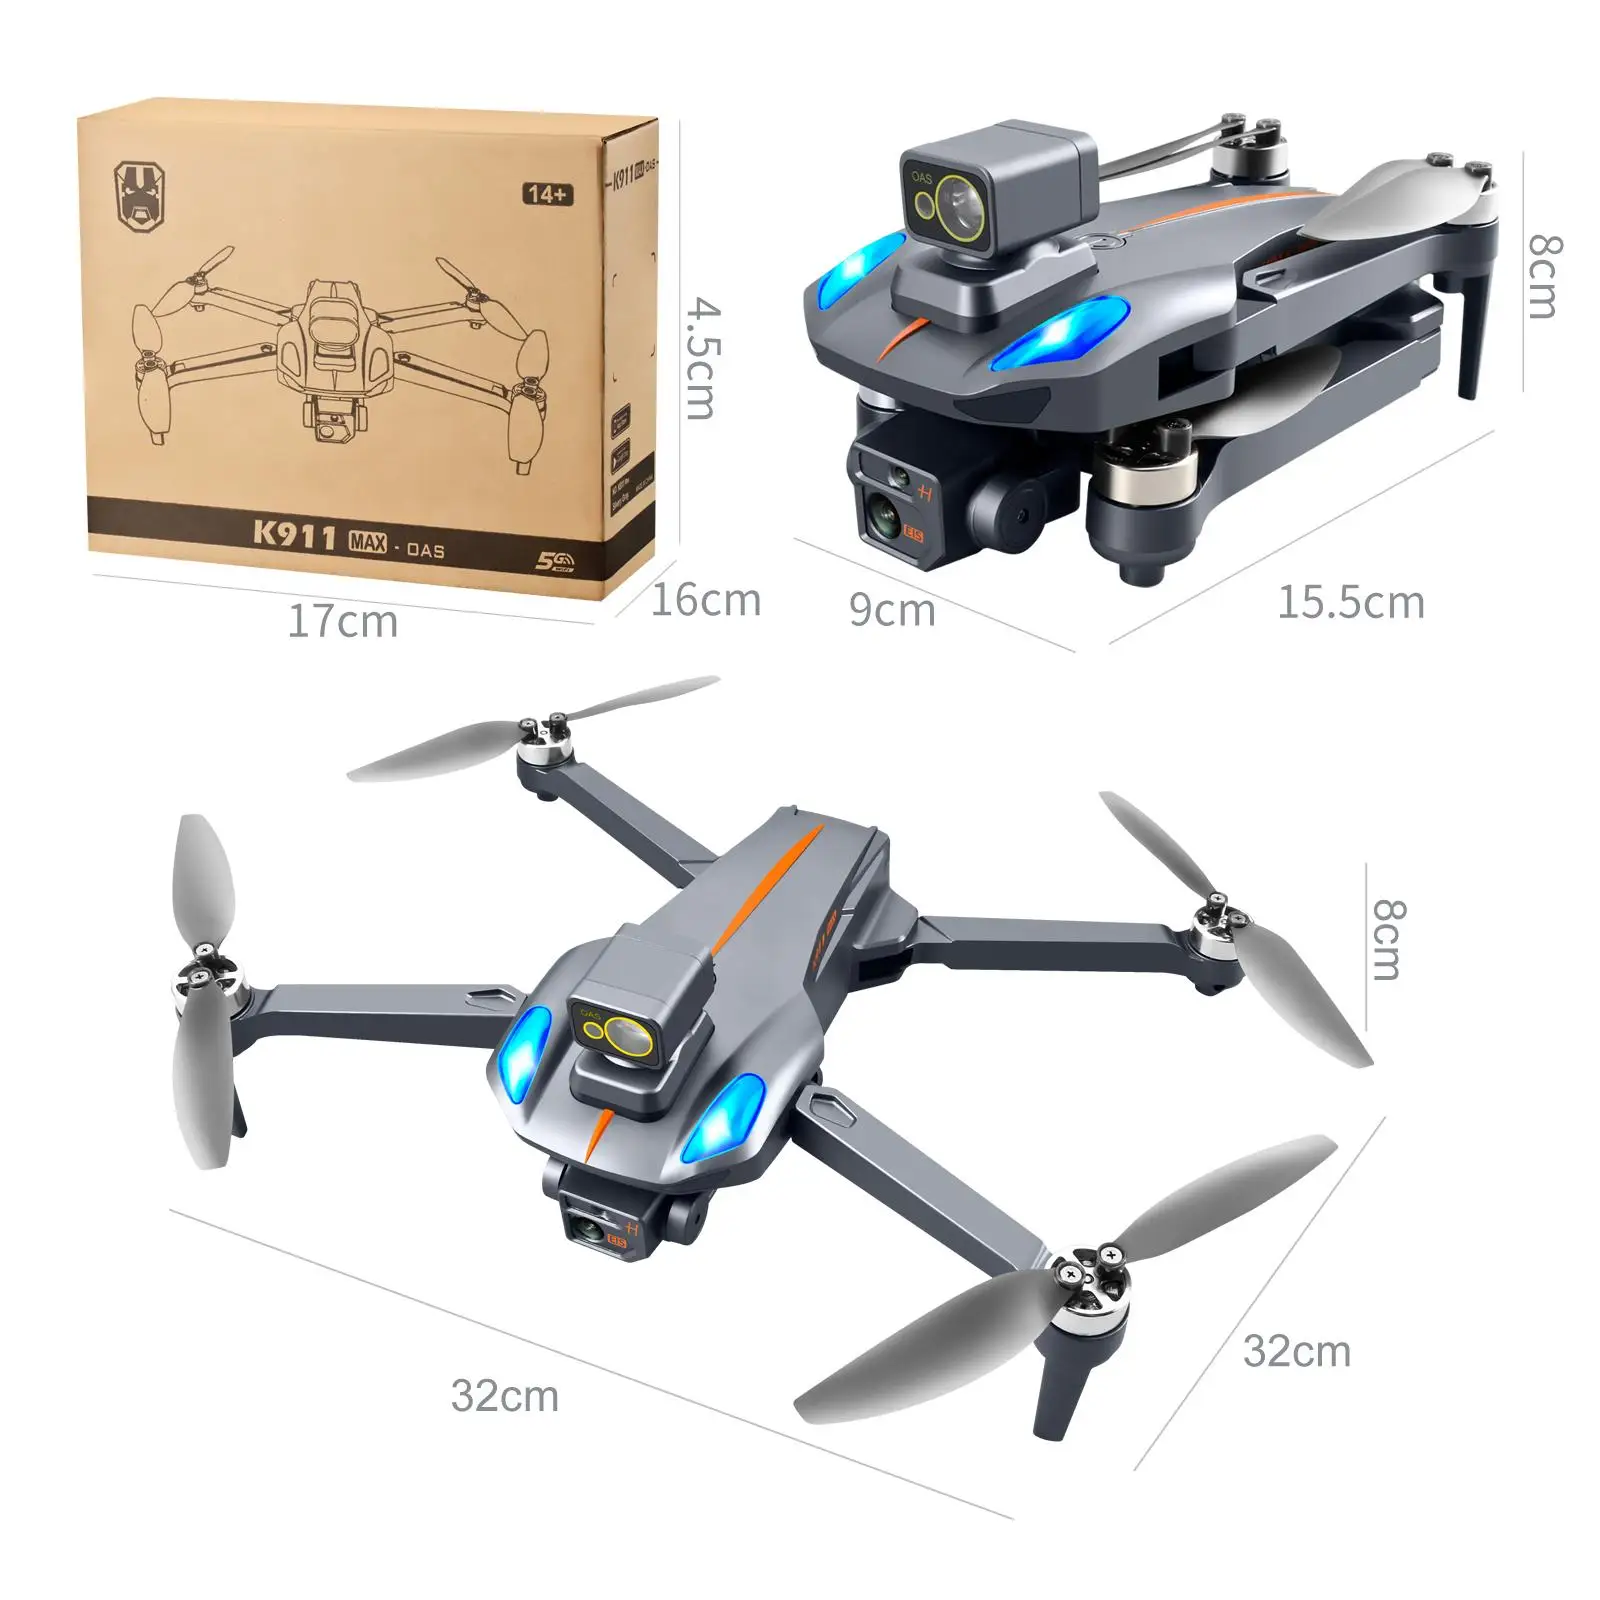 Brushless RC Drone Over-Distance Return 50x Zoom RC Quadcopter for Holiday Gifts - No ObstacleAvoidance